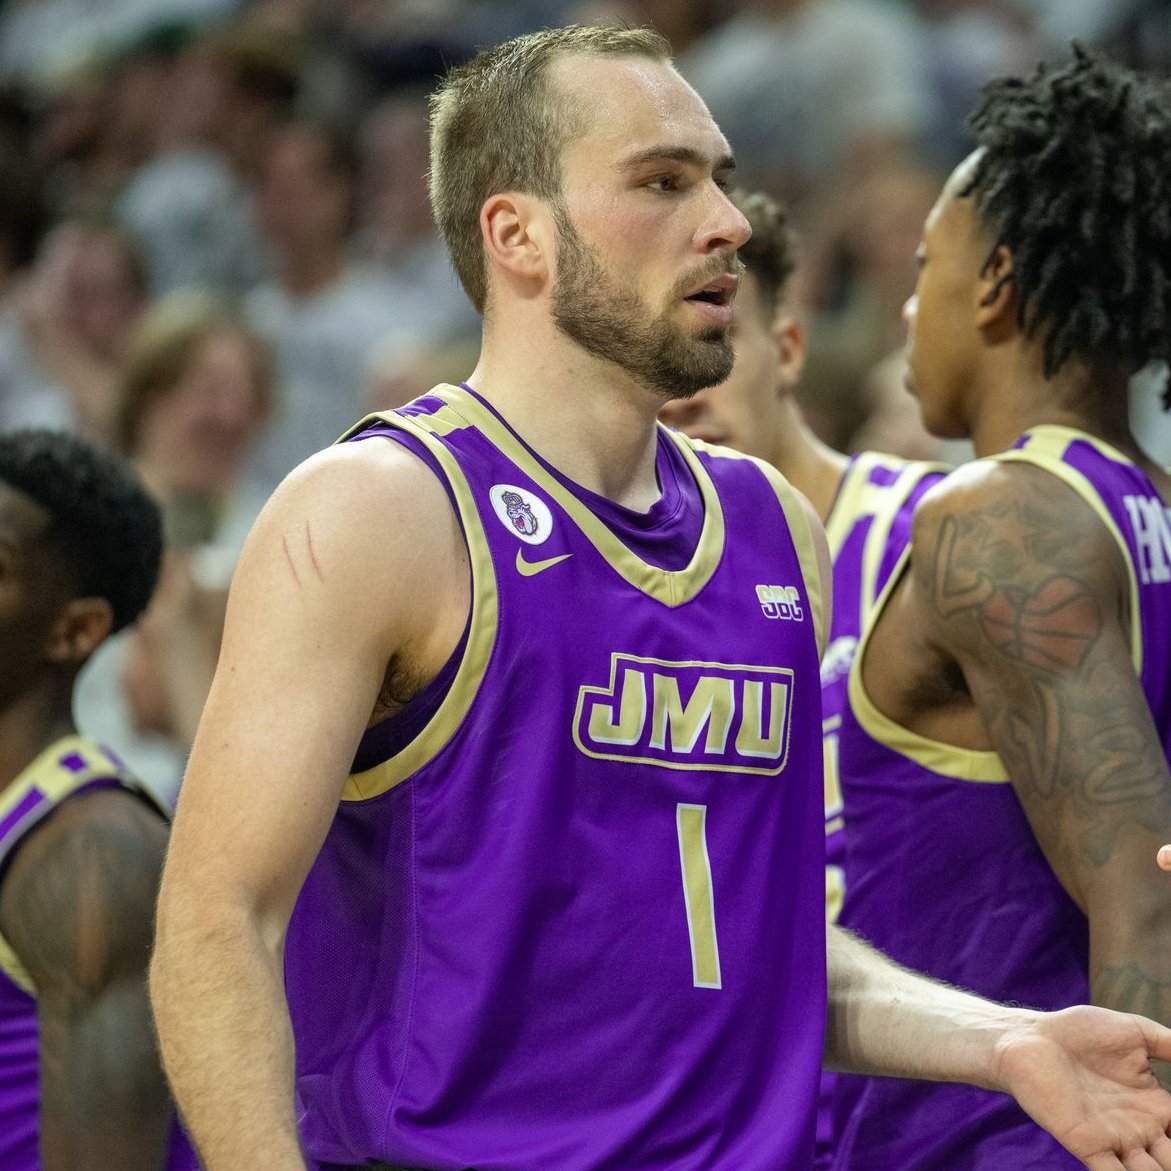 🏀 Listen to my conversation with JMU senior Noah Freidel as we talk about his journey from South Dakota State to JMU & how he's in a great place mentally to close out his college career. #24 Dukes vs. Radford tonight. 🔊 on.soundcloud.com/f98m2 @JMUMBasketball | @Noah_Freidel